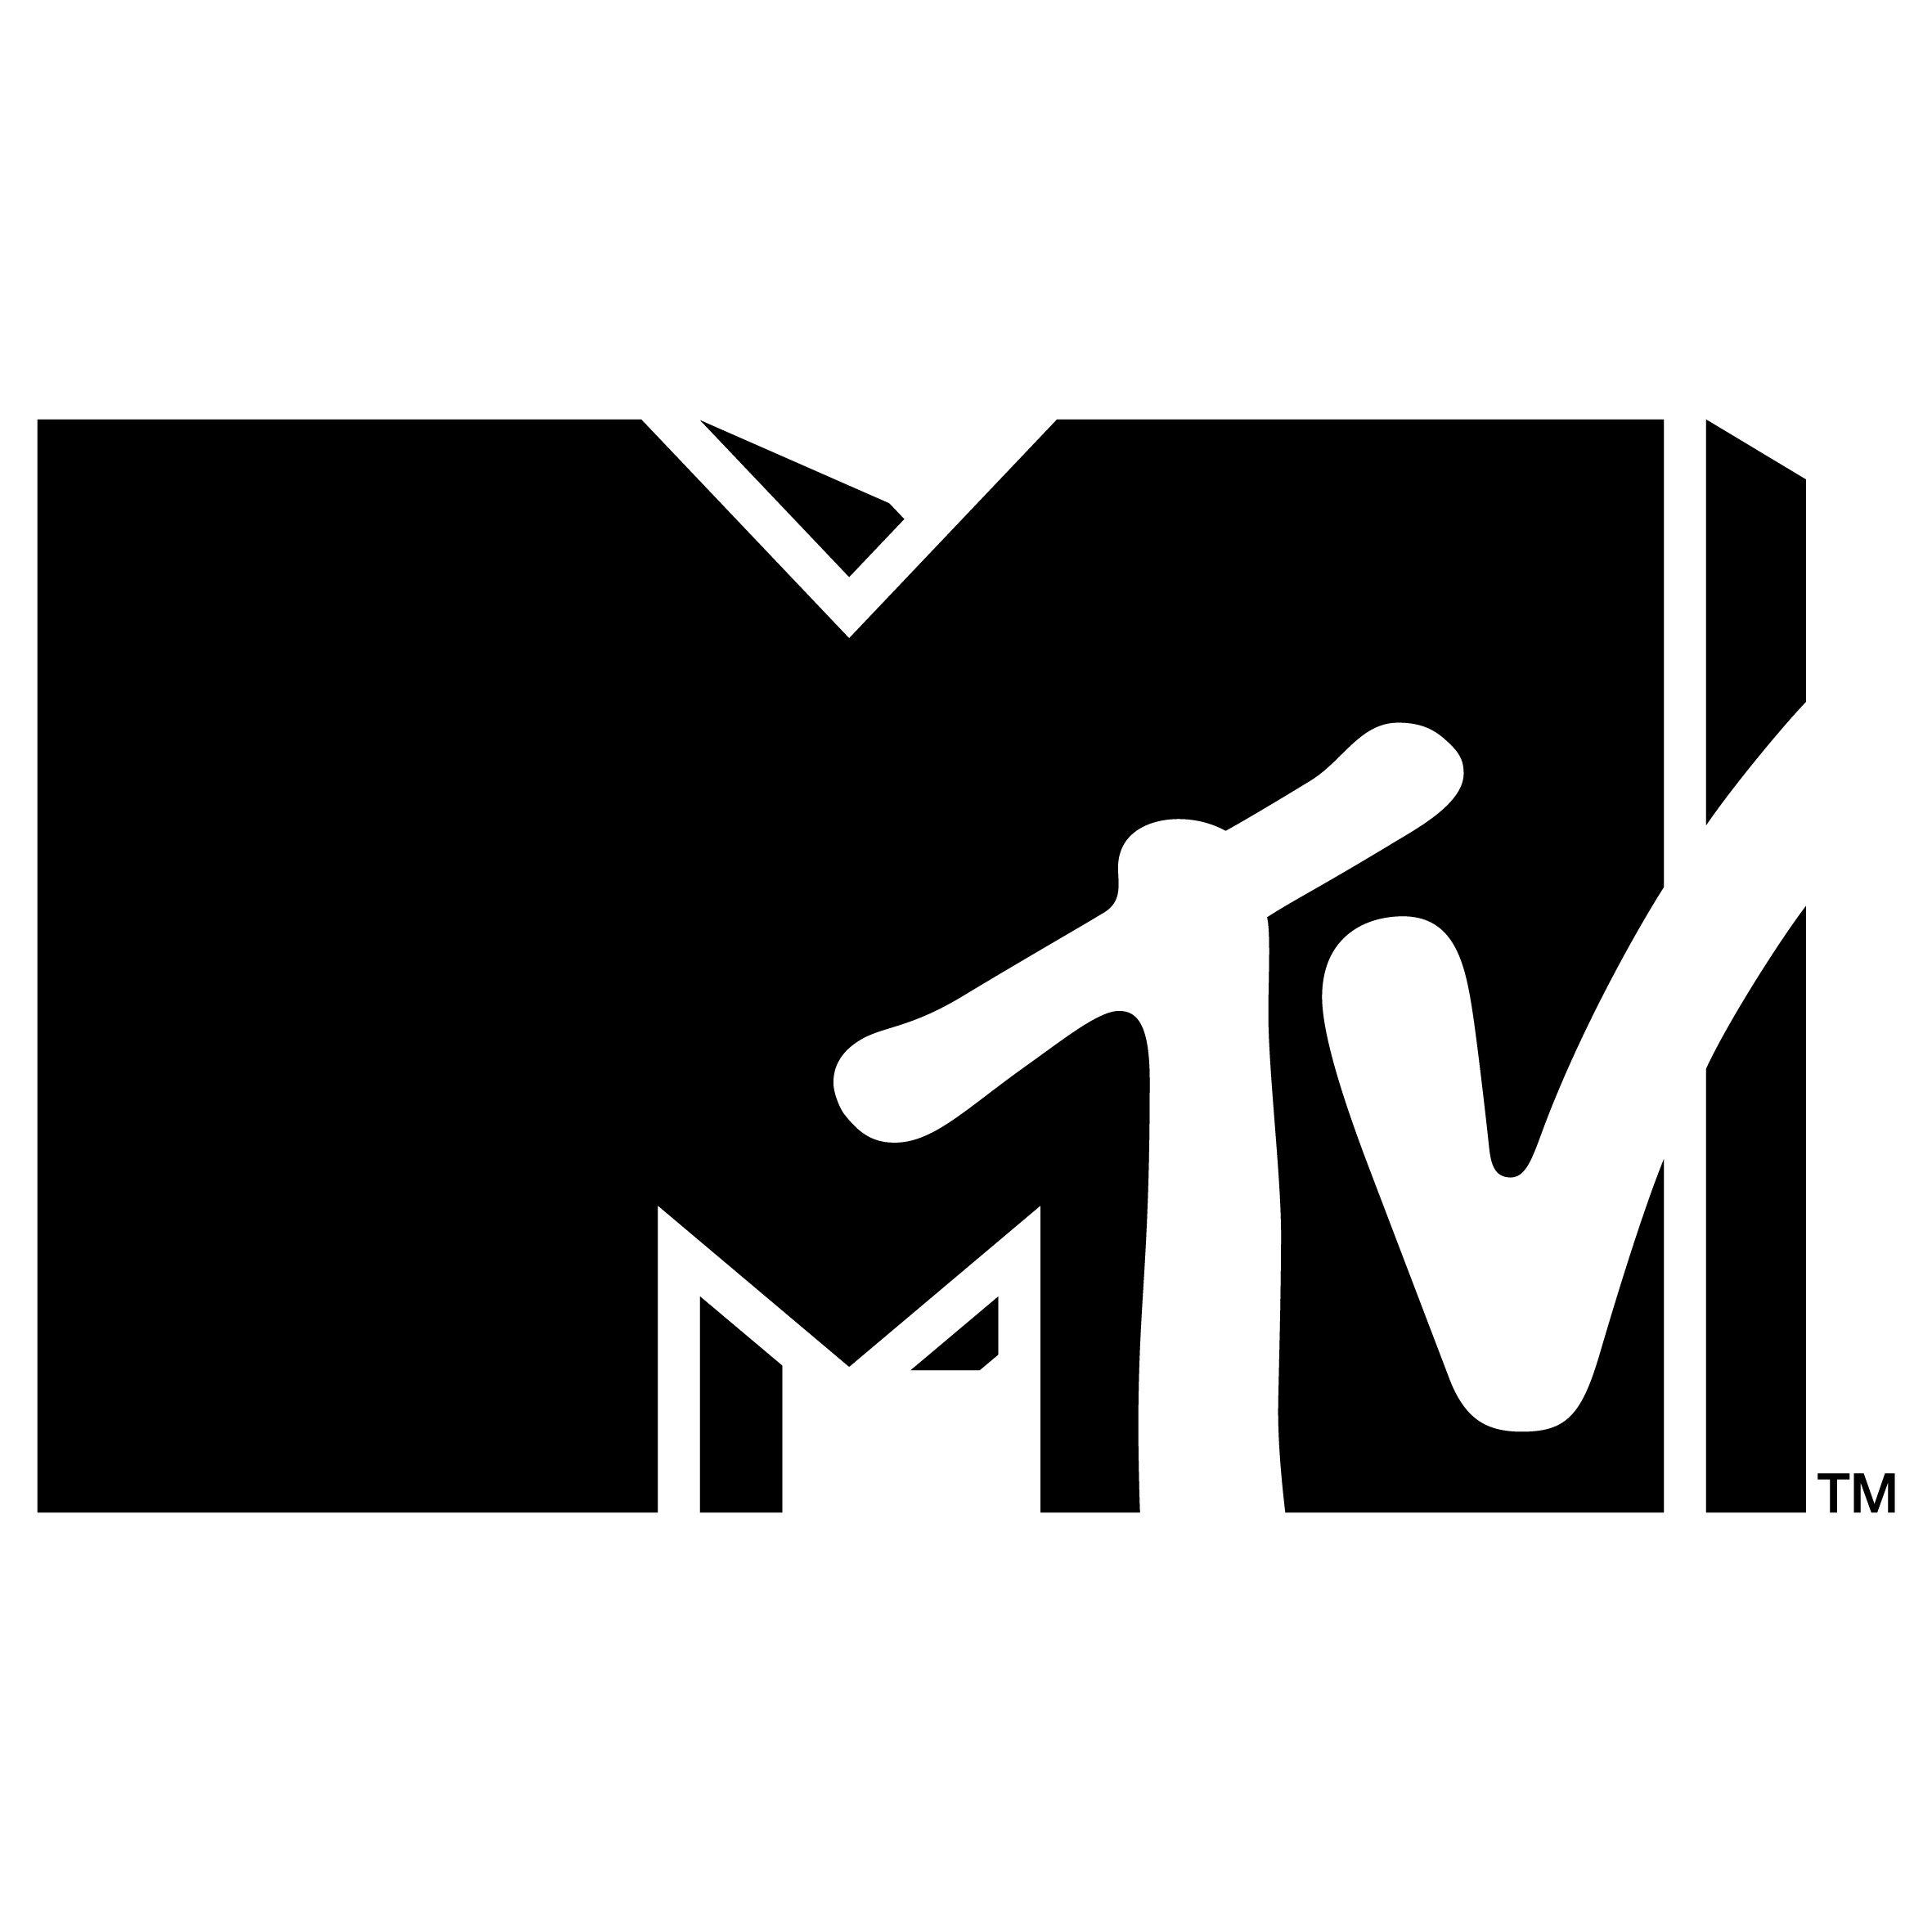 MTV Logo - MTV, LOGO and VIACOM join in fielding largest ever global study